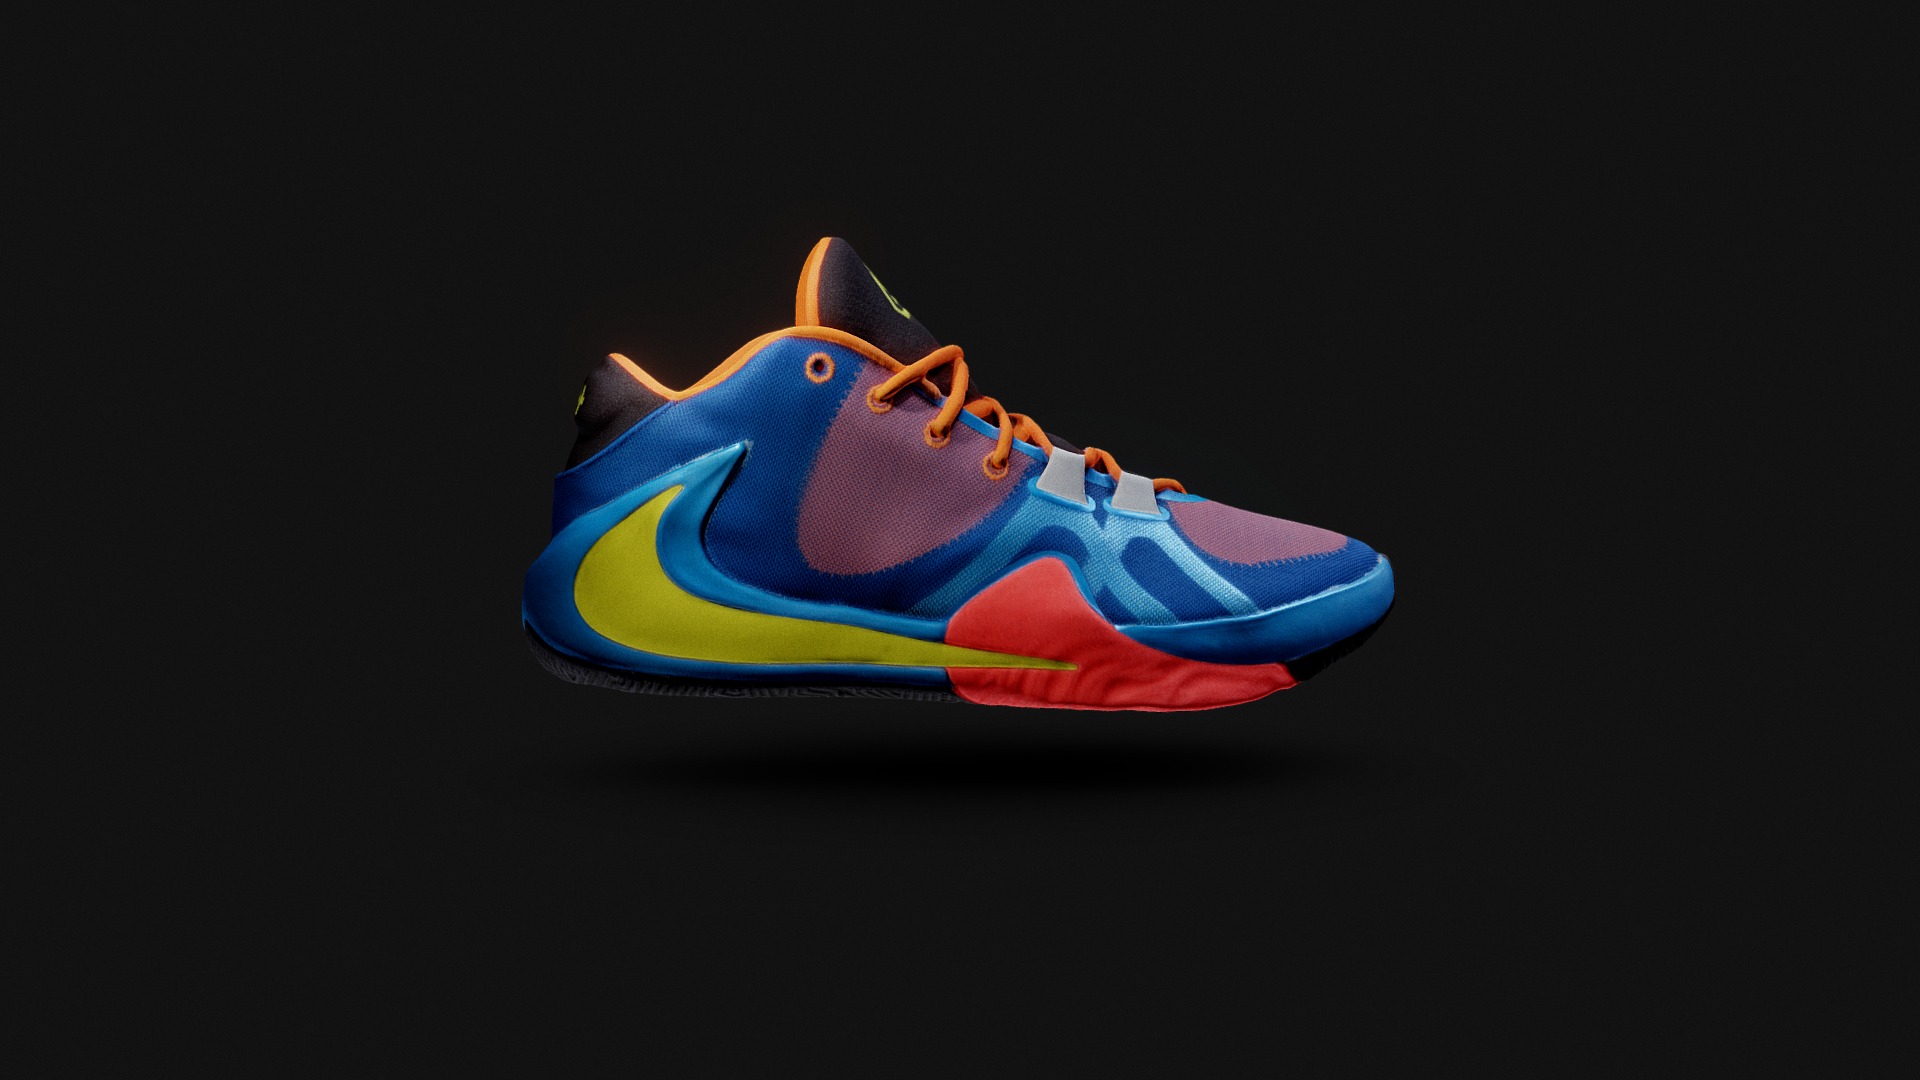 3D model Nike Zoom Freak 1 - This is a 3D model of the Nike Zoom Freak 1. The 3D model is about a colorful butterfly on a black background.